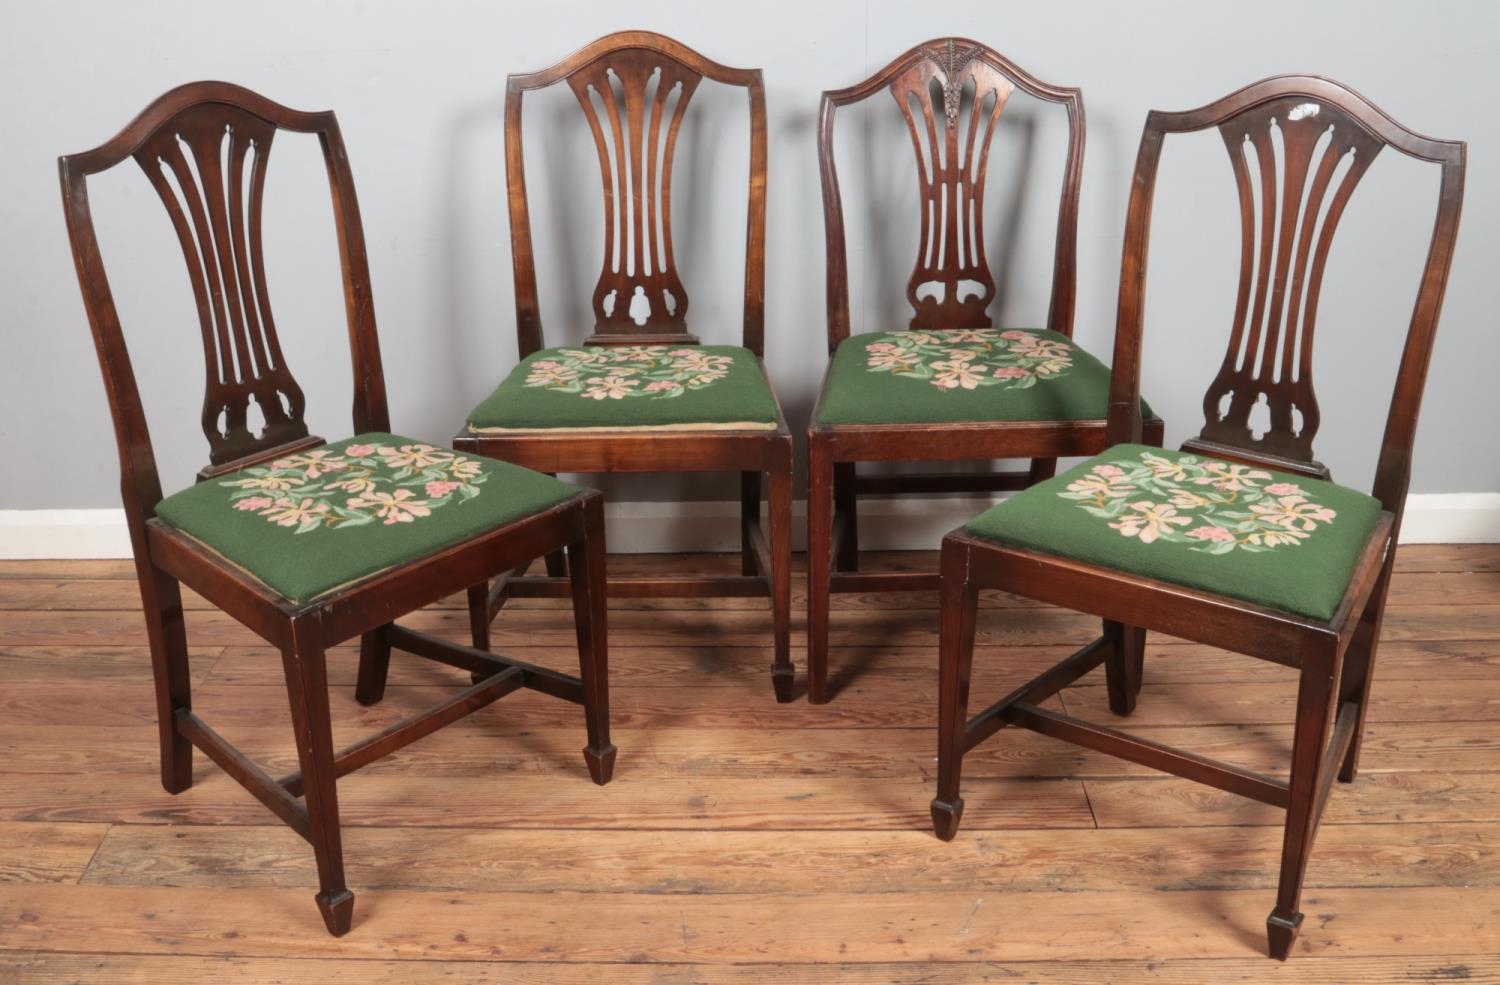 A matched set of four mahogany dining chairs. Three with pierced slats, the other similar having